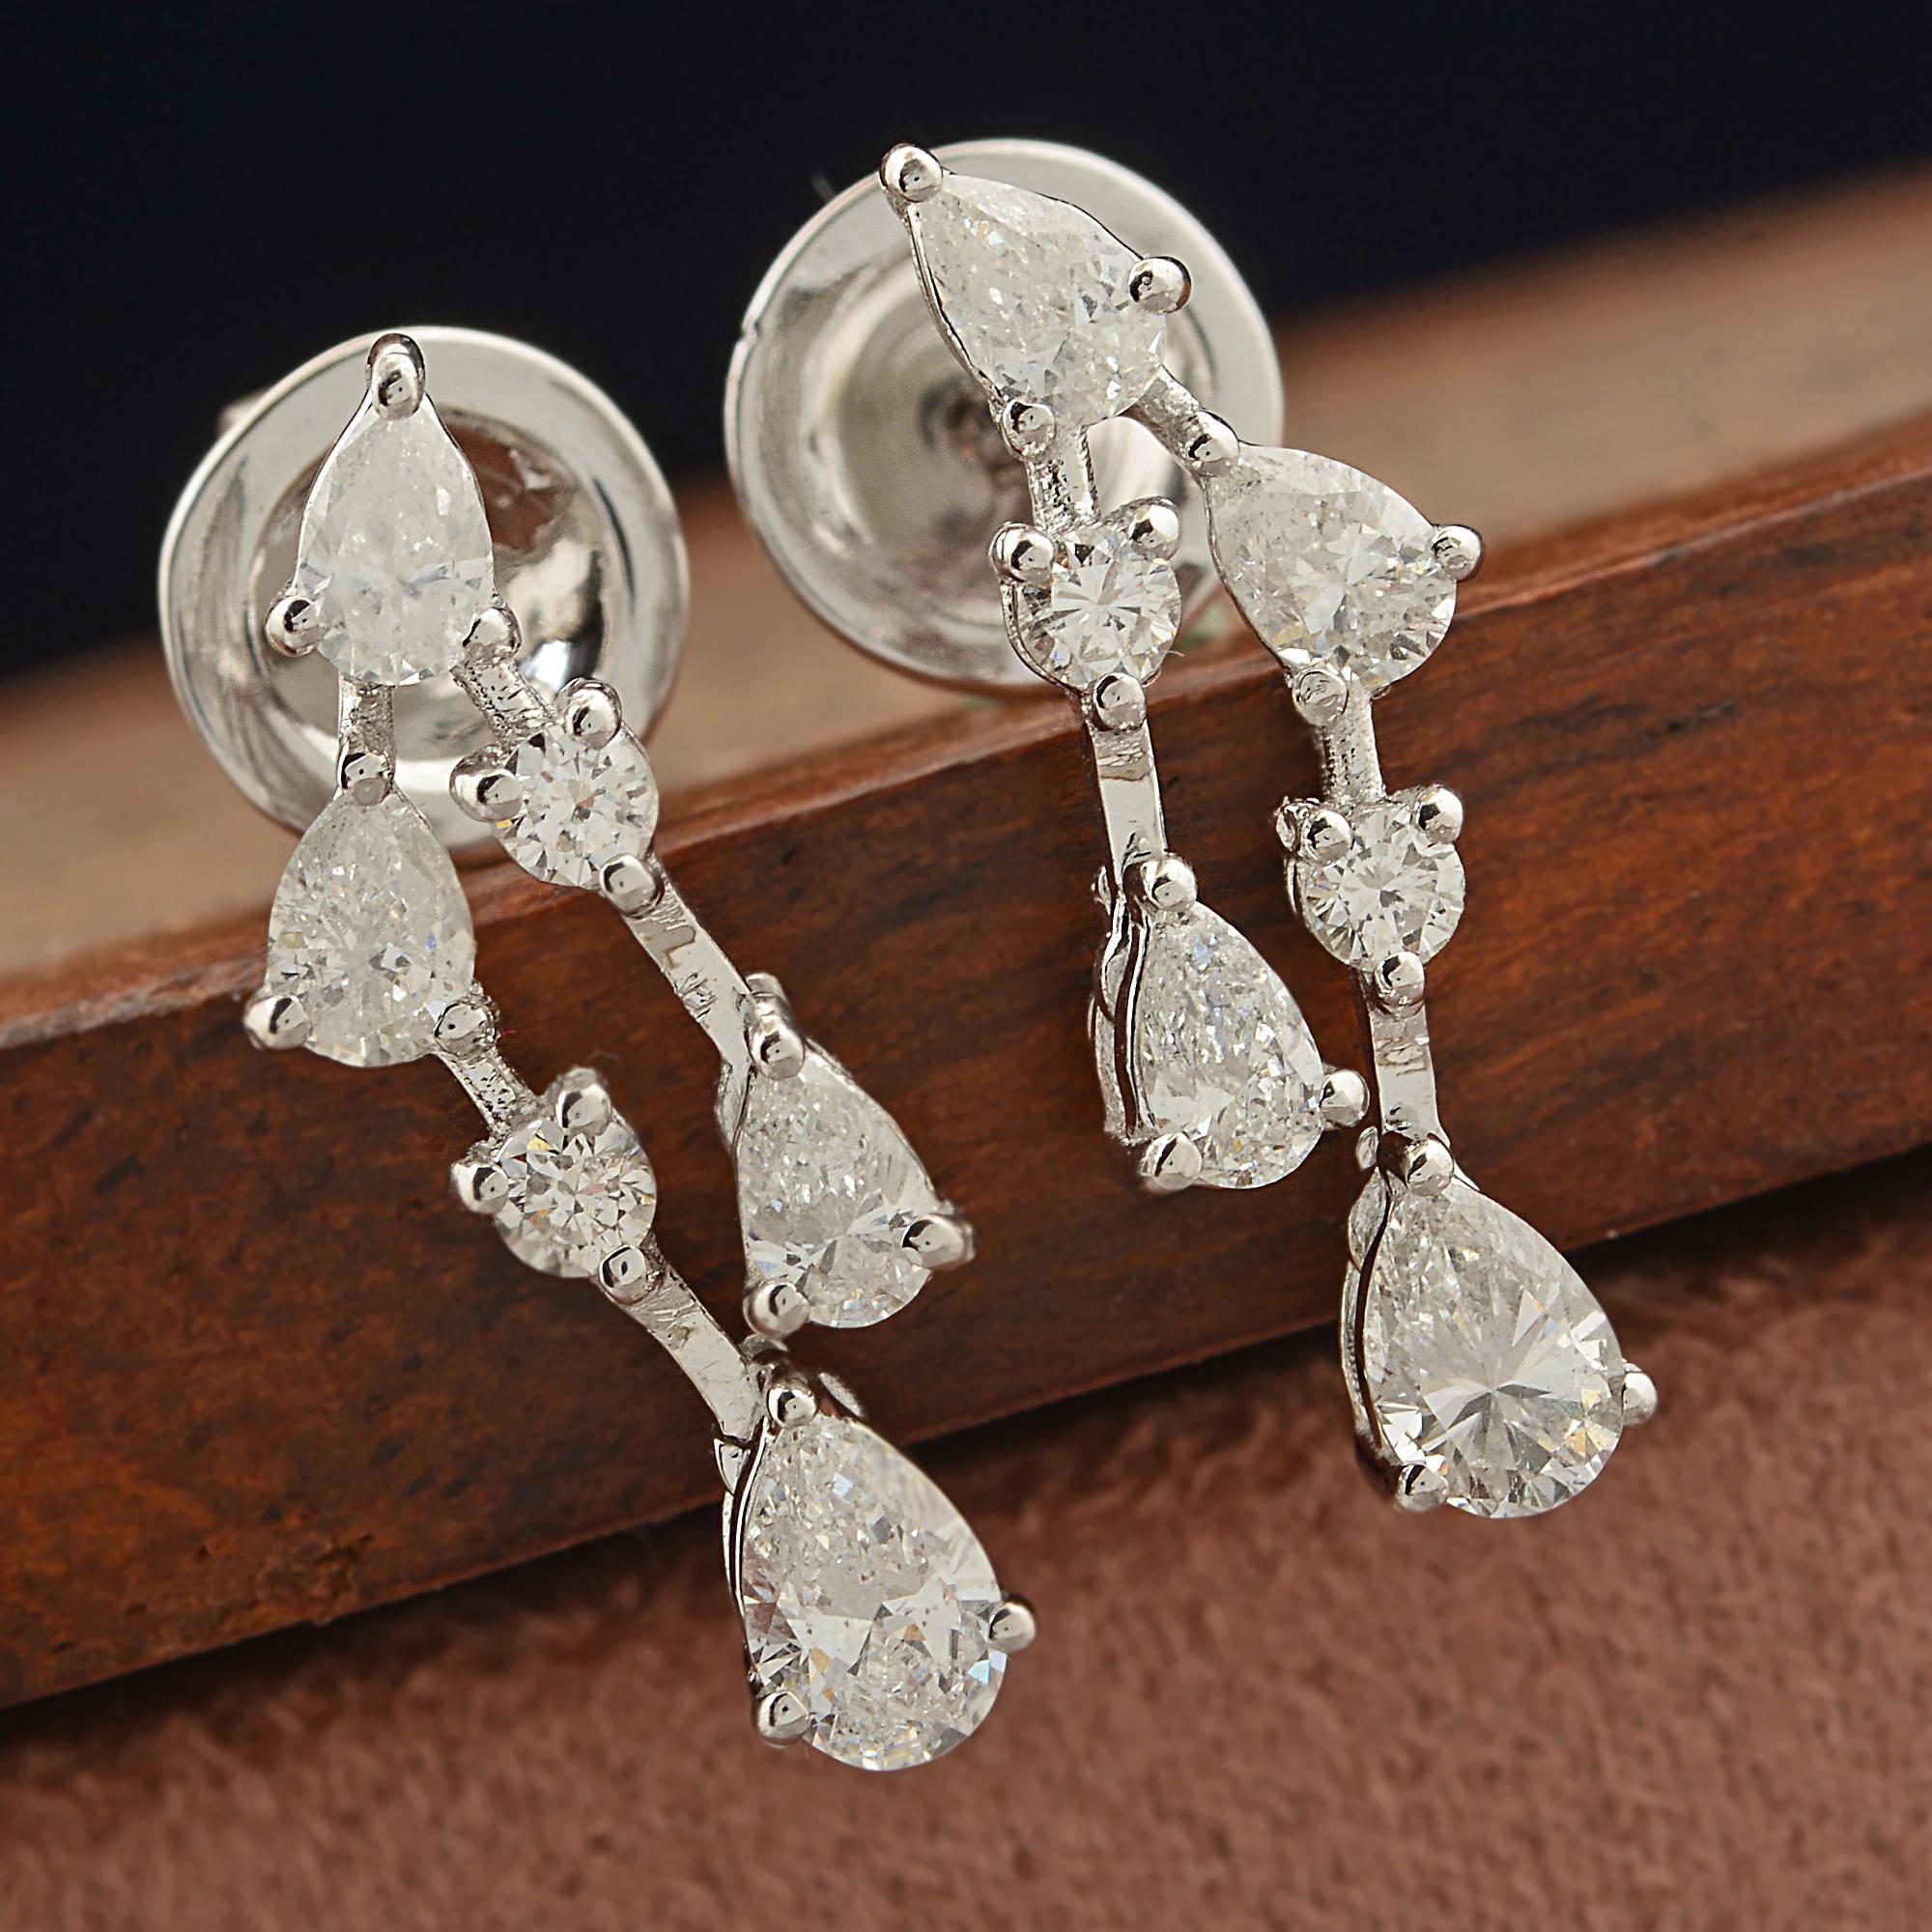 Indulge in the epitome of elegance with these exquisite 1.10 Carat Pear & Round Diamond Dangle Earrings crafted in 18 Karat White Gold. Radiating sophistication and glamour, these dainty yet dazzling earrings are a testament to fine jewelry